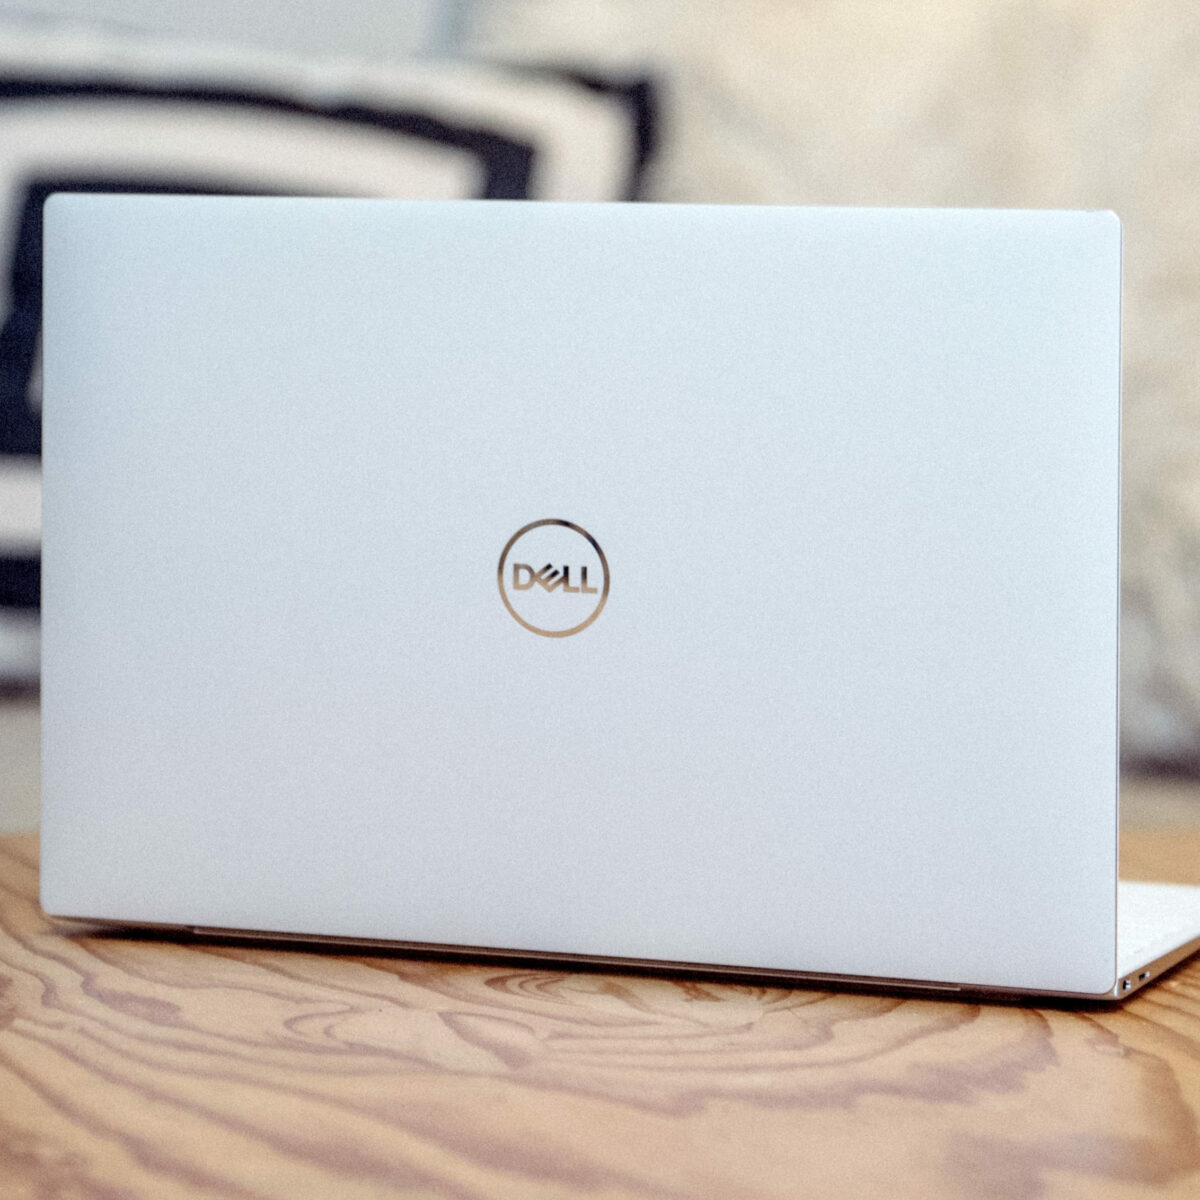 Dell XPS 15 Not Connecting to Wi-Fi? Here's What To Do